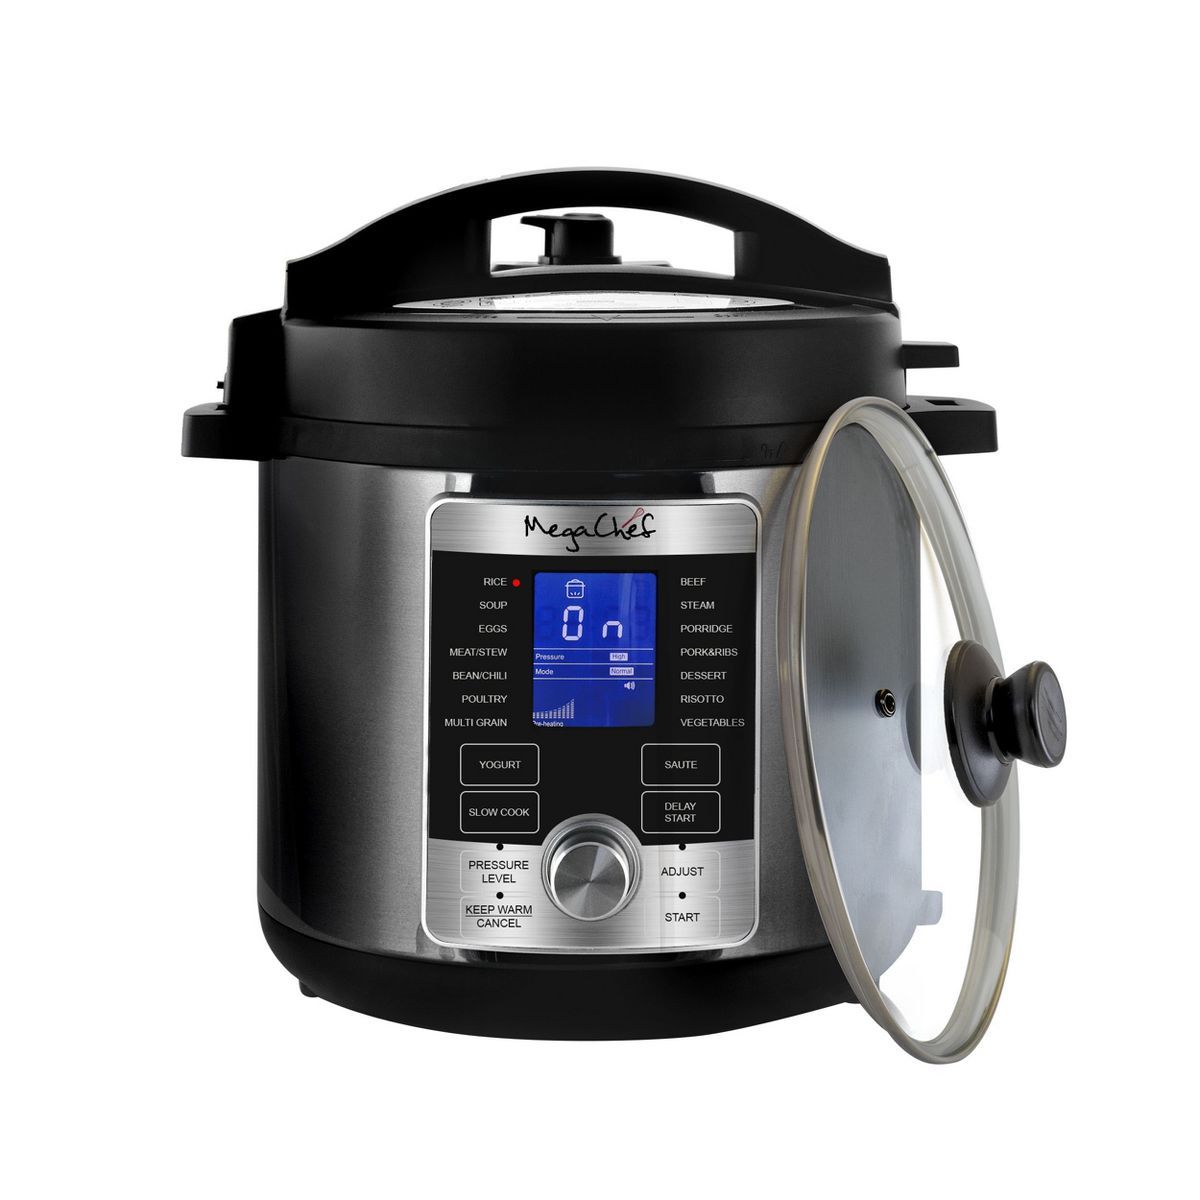 MegaChef 6 Quart Stainless Steel Electric Digital Pressure Cooker with Lid | Target